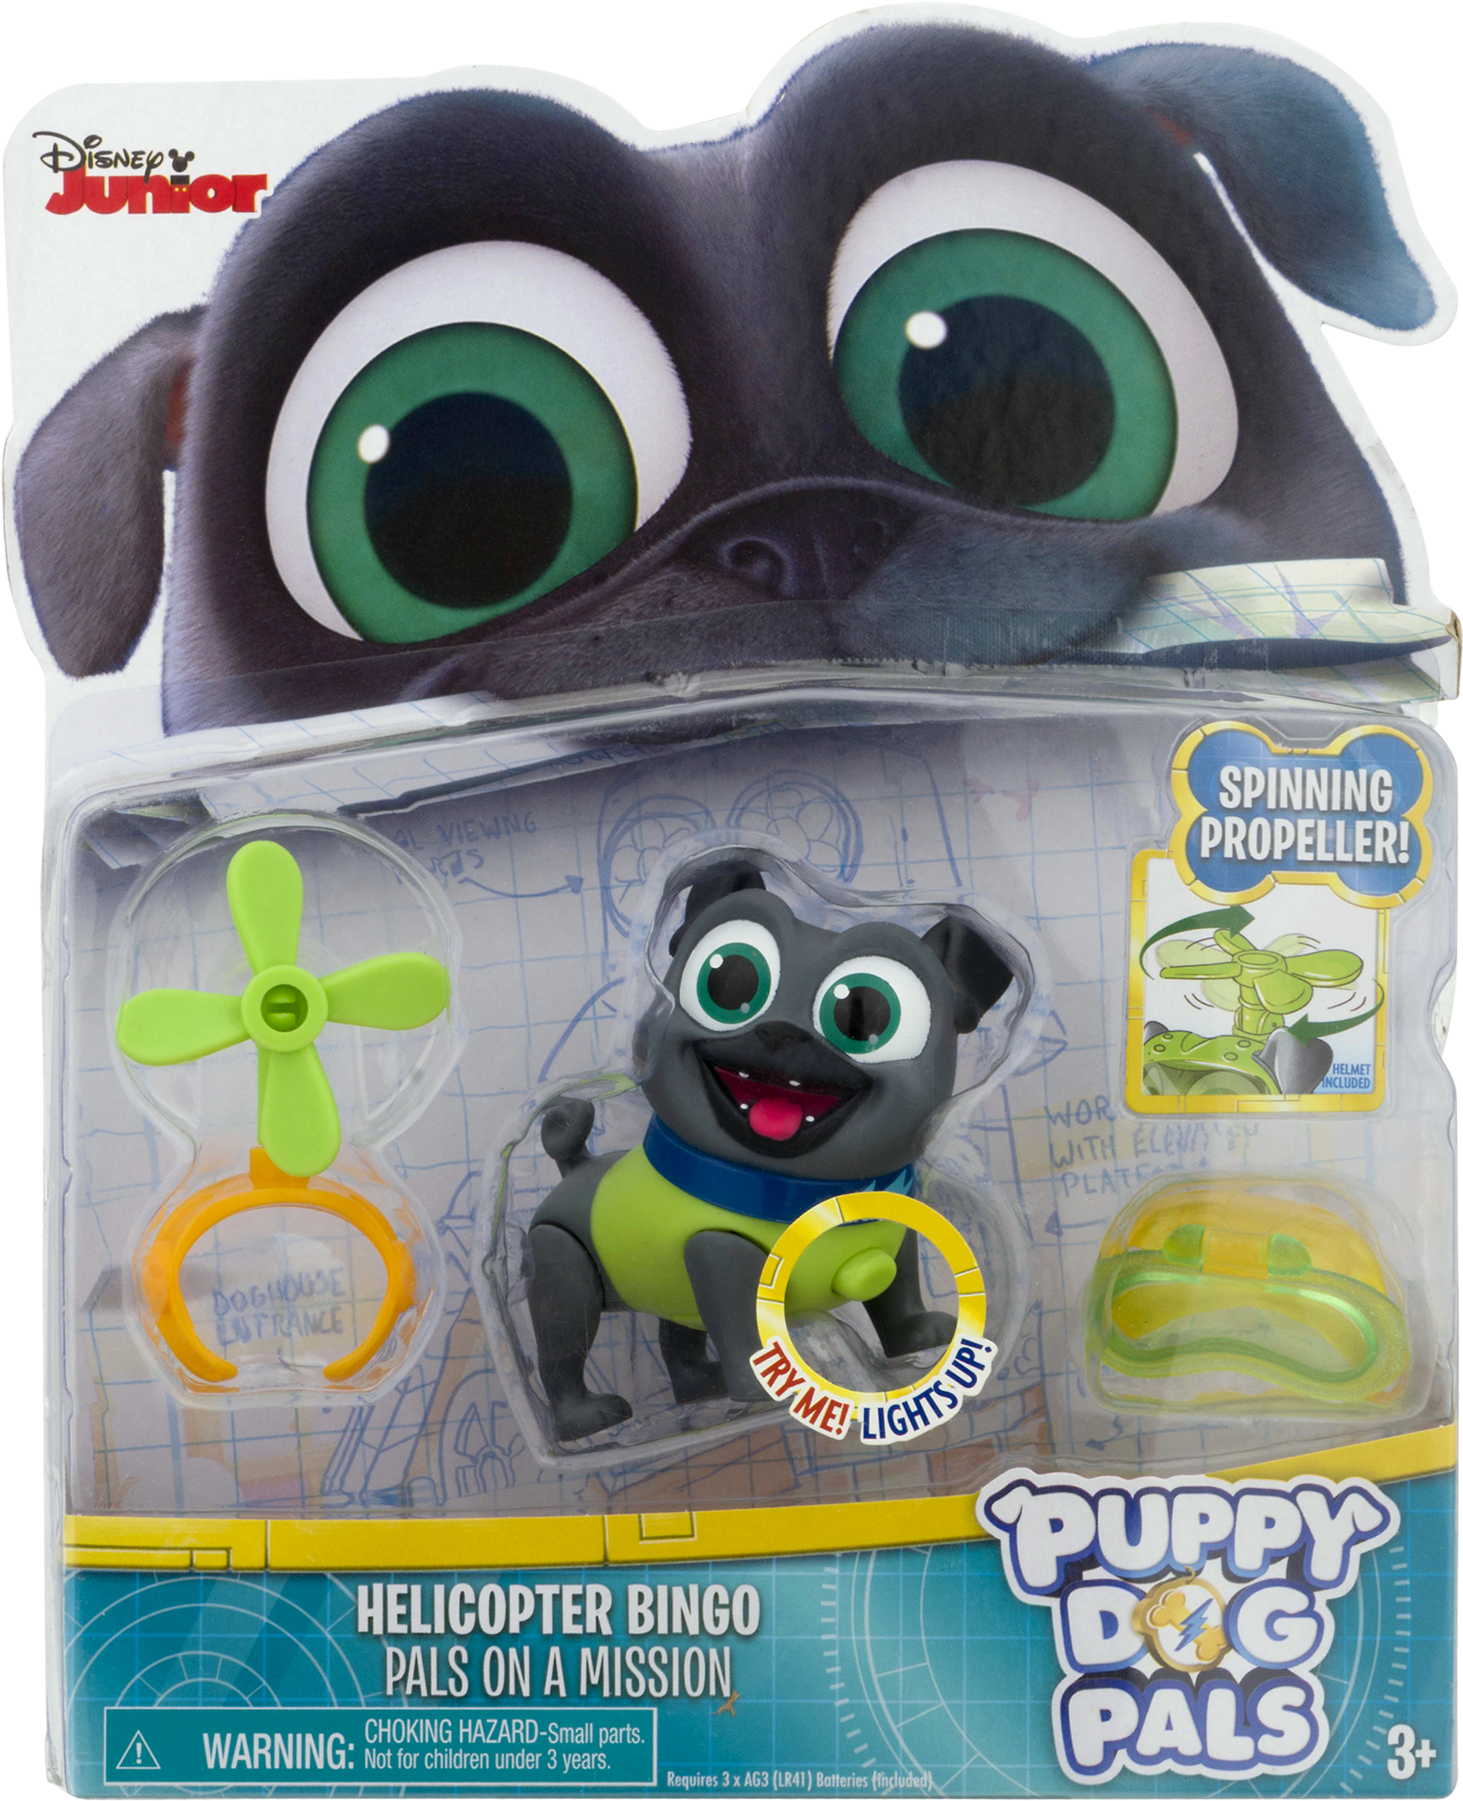 Puppy Dog Pals Helicopter Bingo Toy Packaging PNG